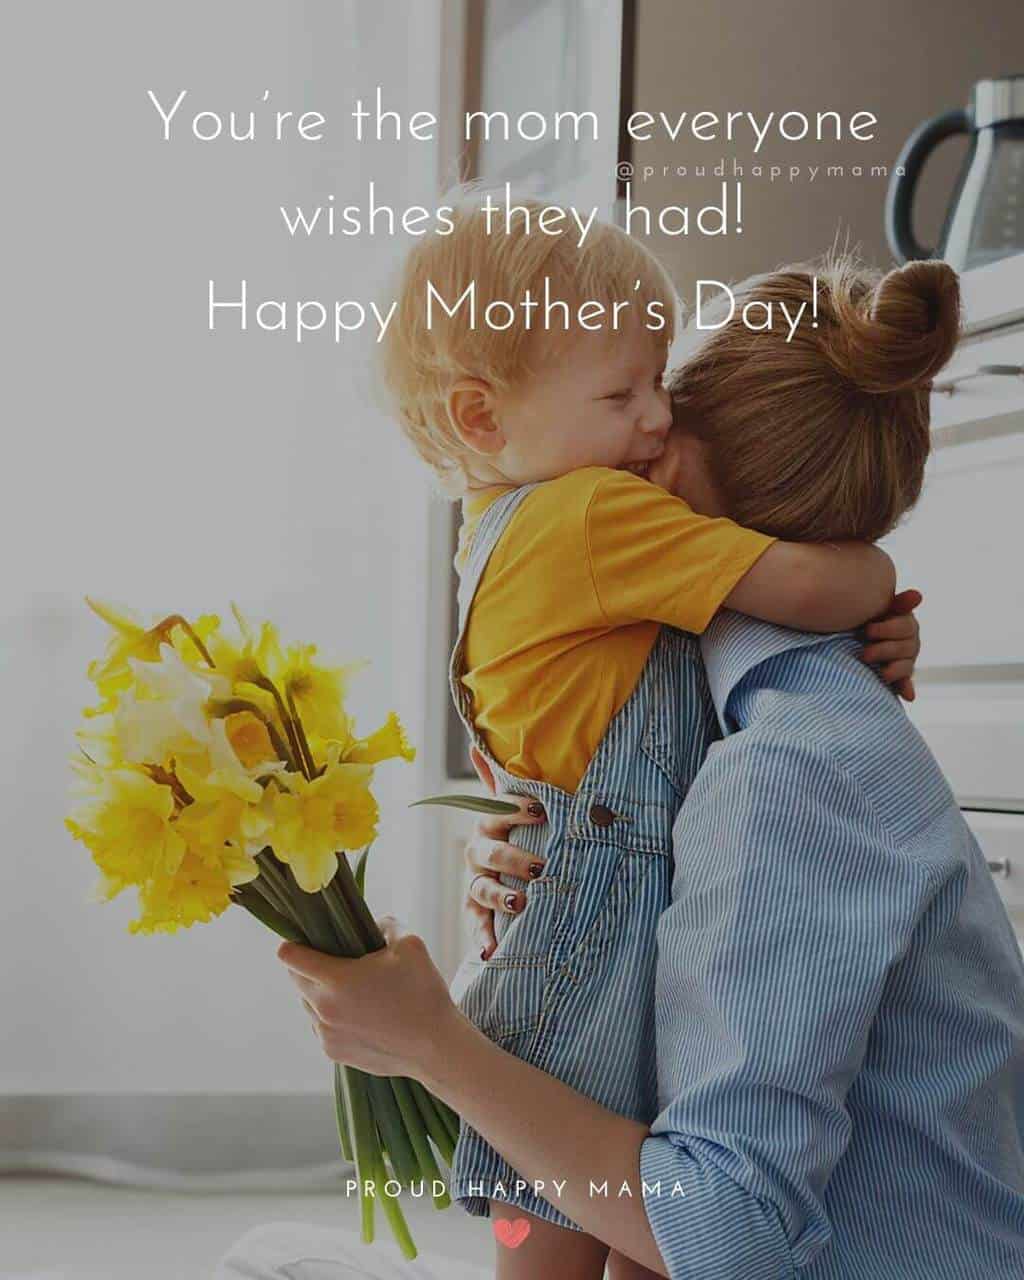 Mothers Day Quotes | You’re the mom everyone wishes they had! Happy Mother’s Day!